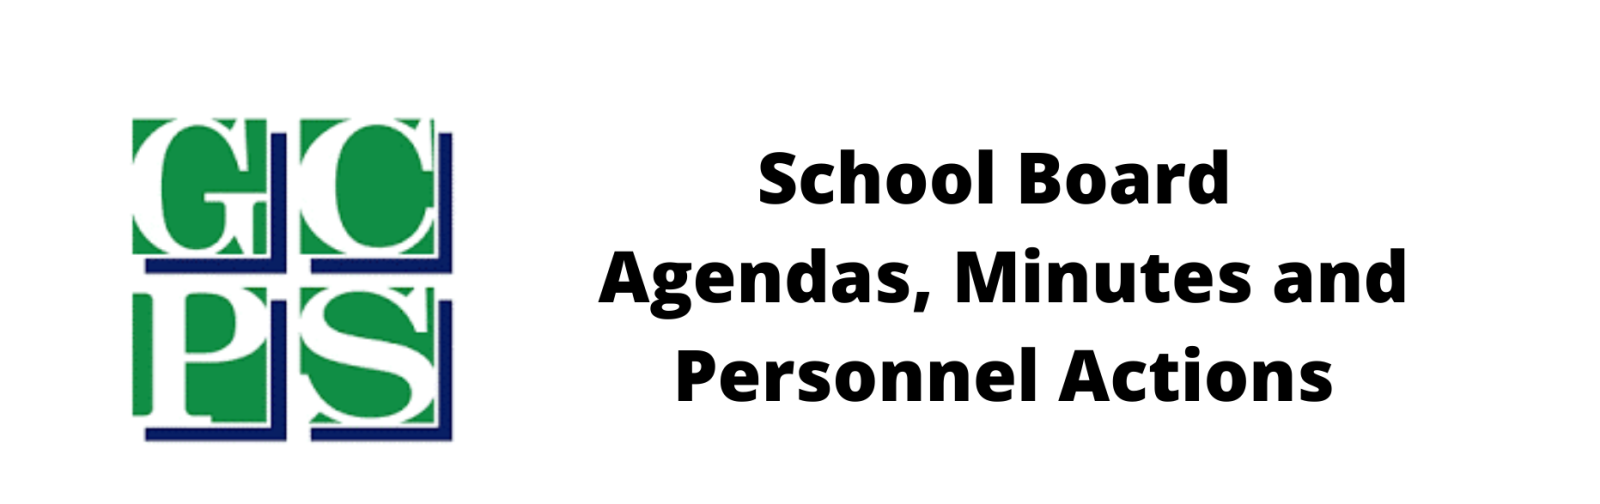 School Board Agendas Minutes and Personnel Actions